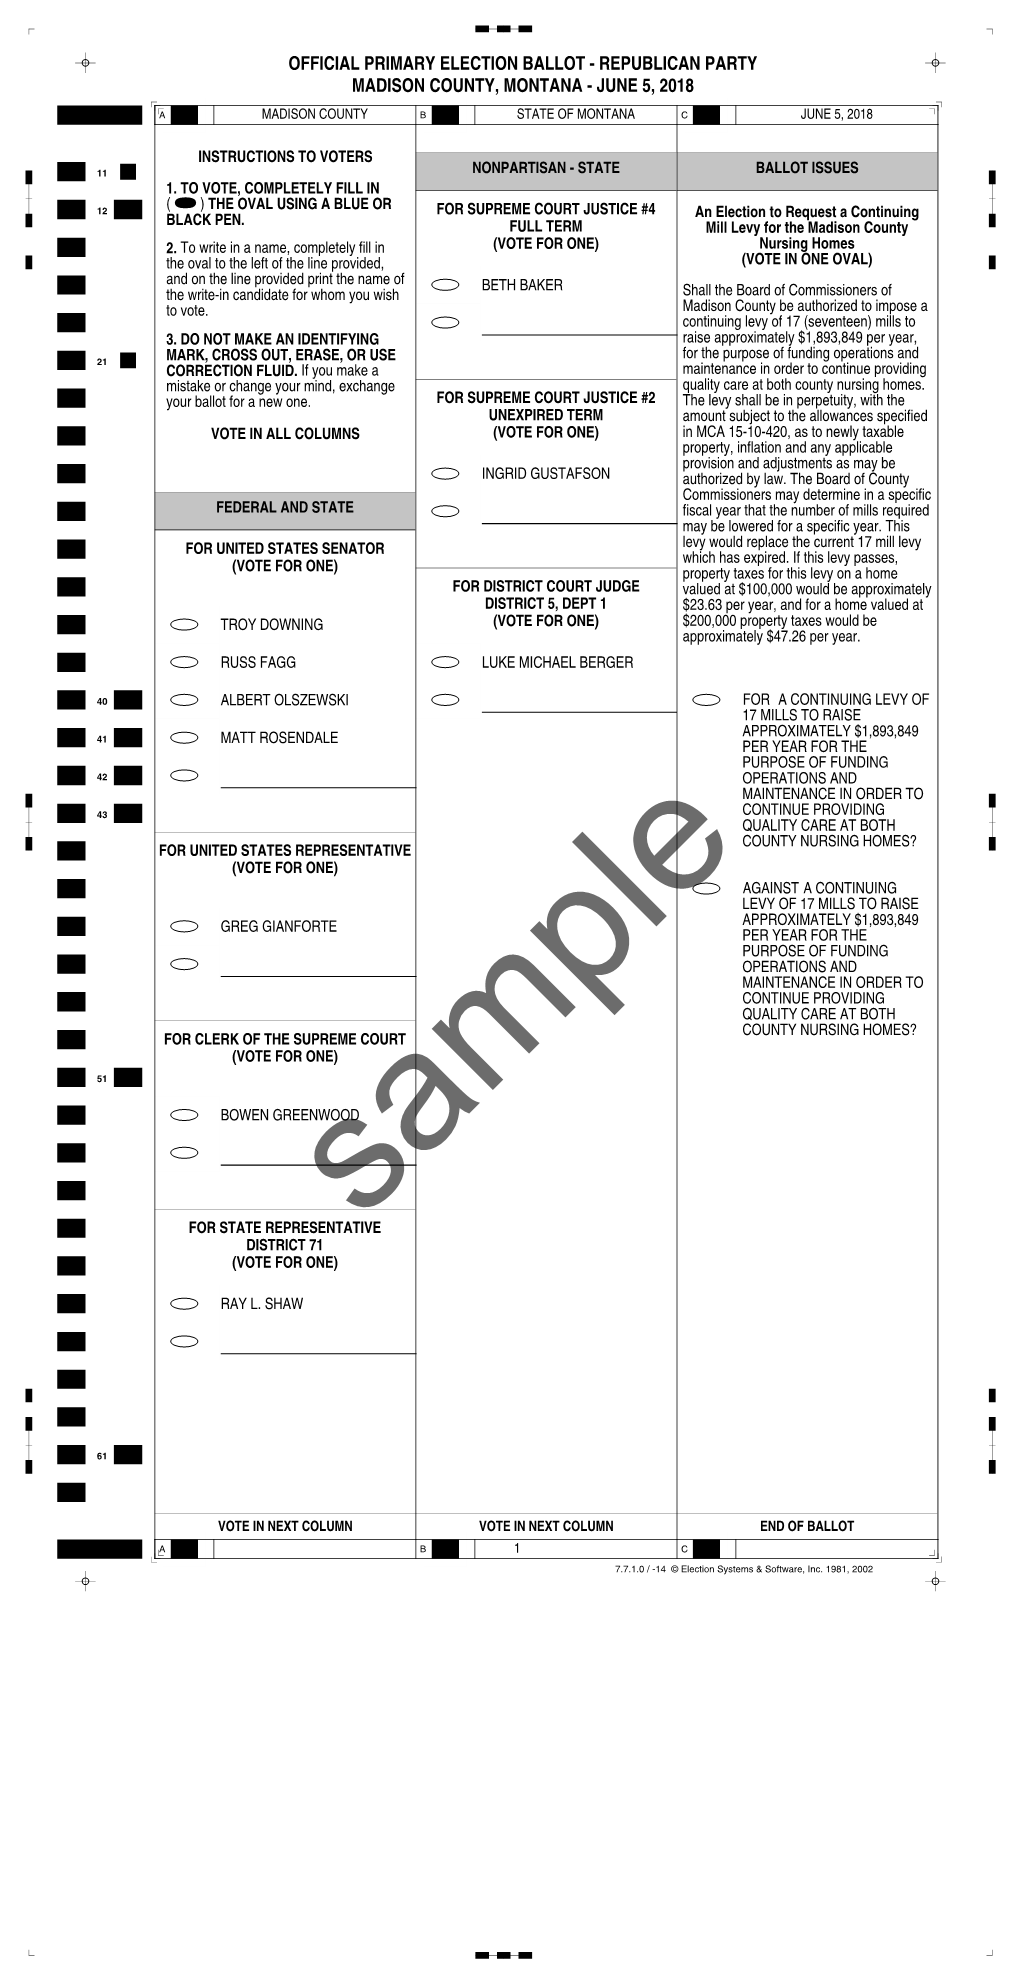 Official Primary Election Ballot - Republican Party Madison County, Montana - June 5, 2018